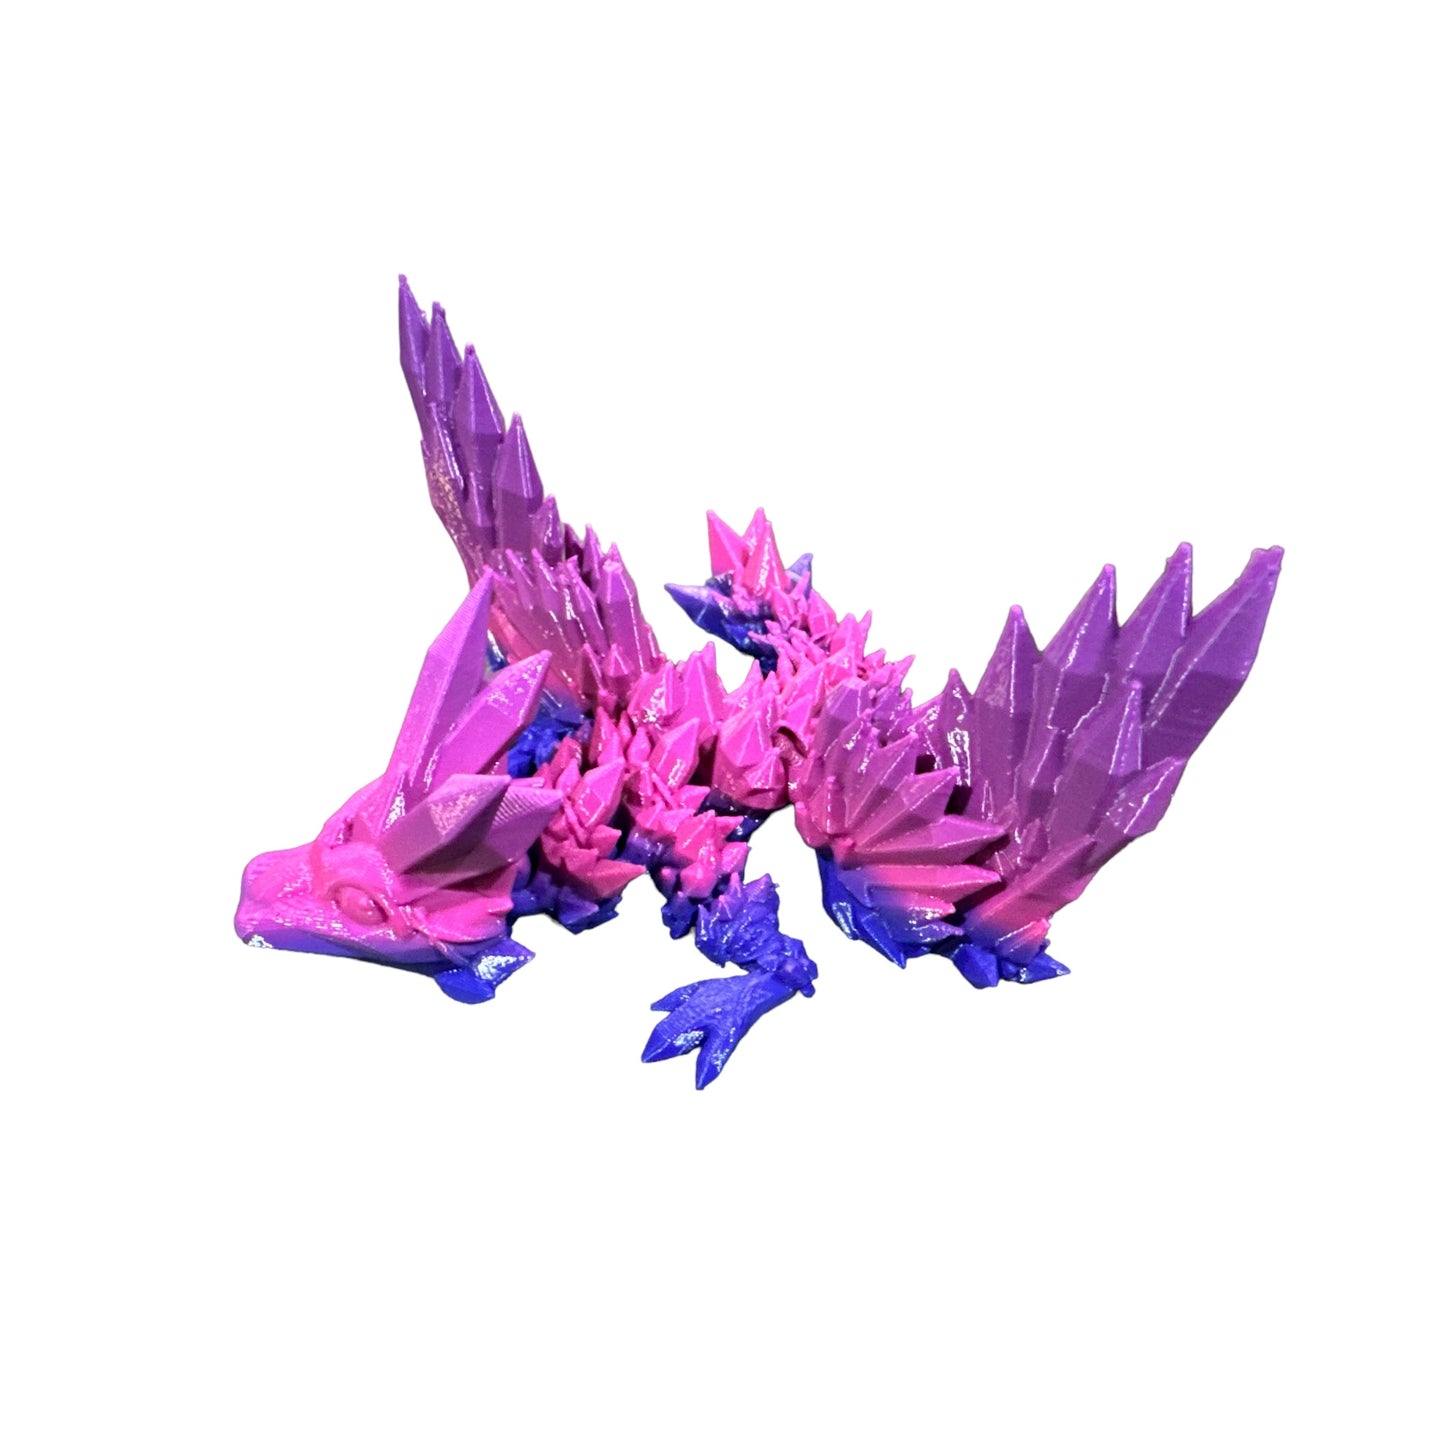 CrystalWing Dragon 3D Printed Articulating Figurine